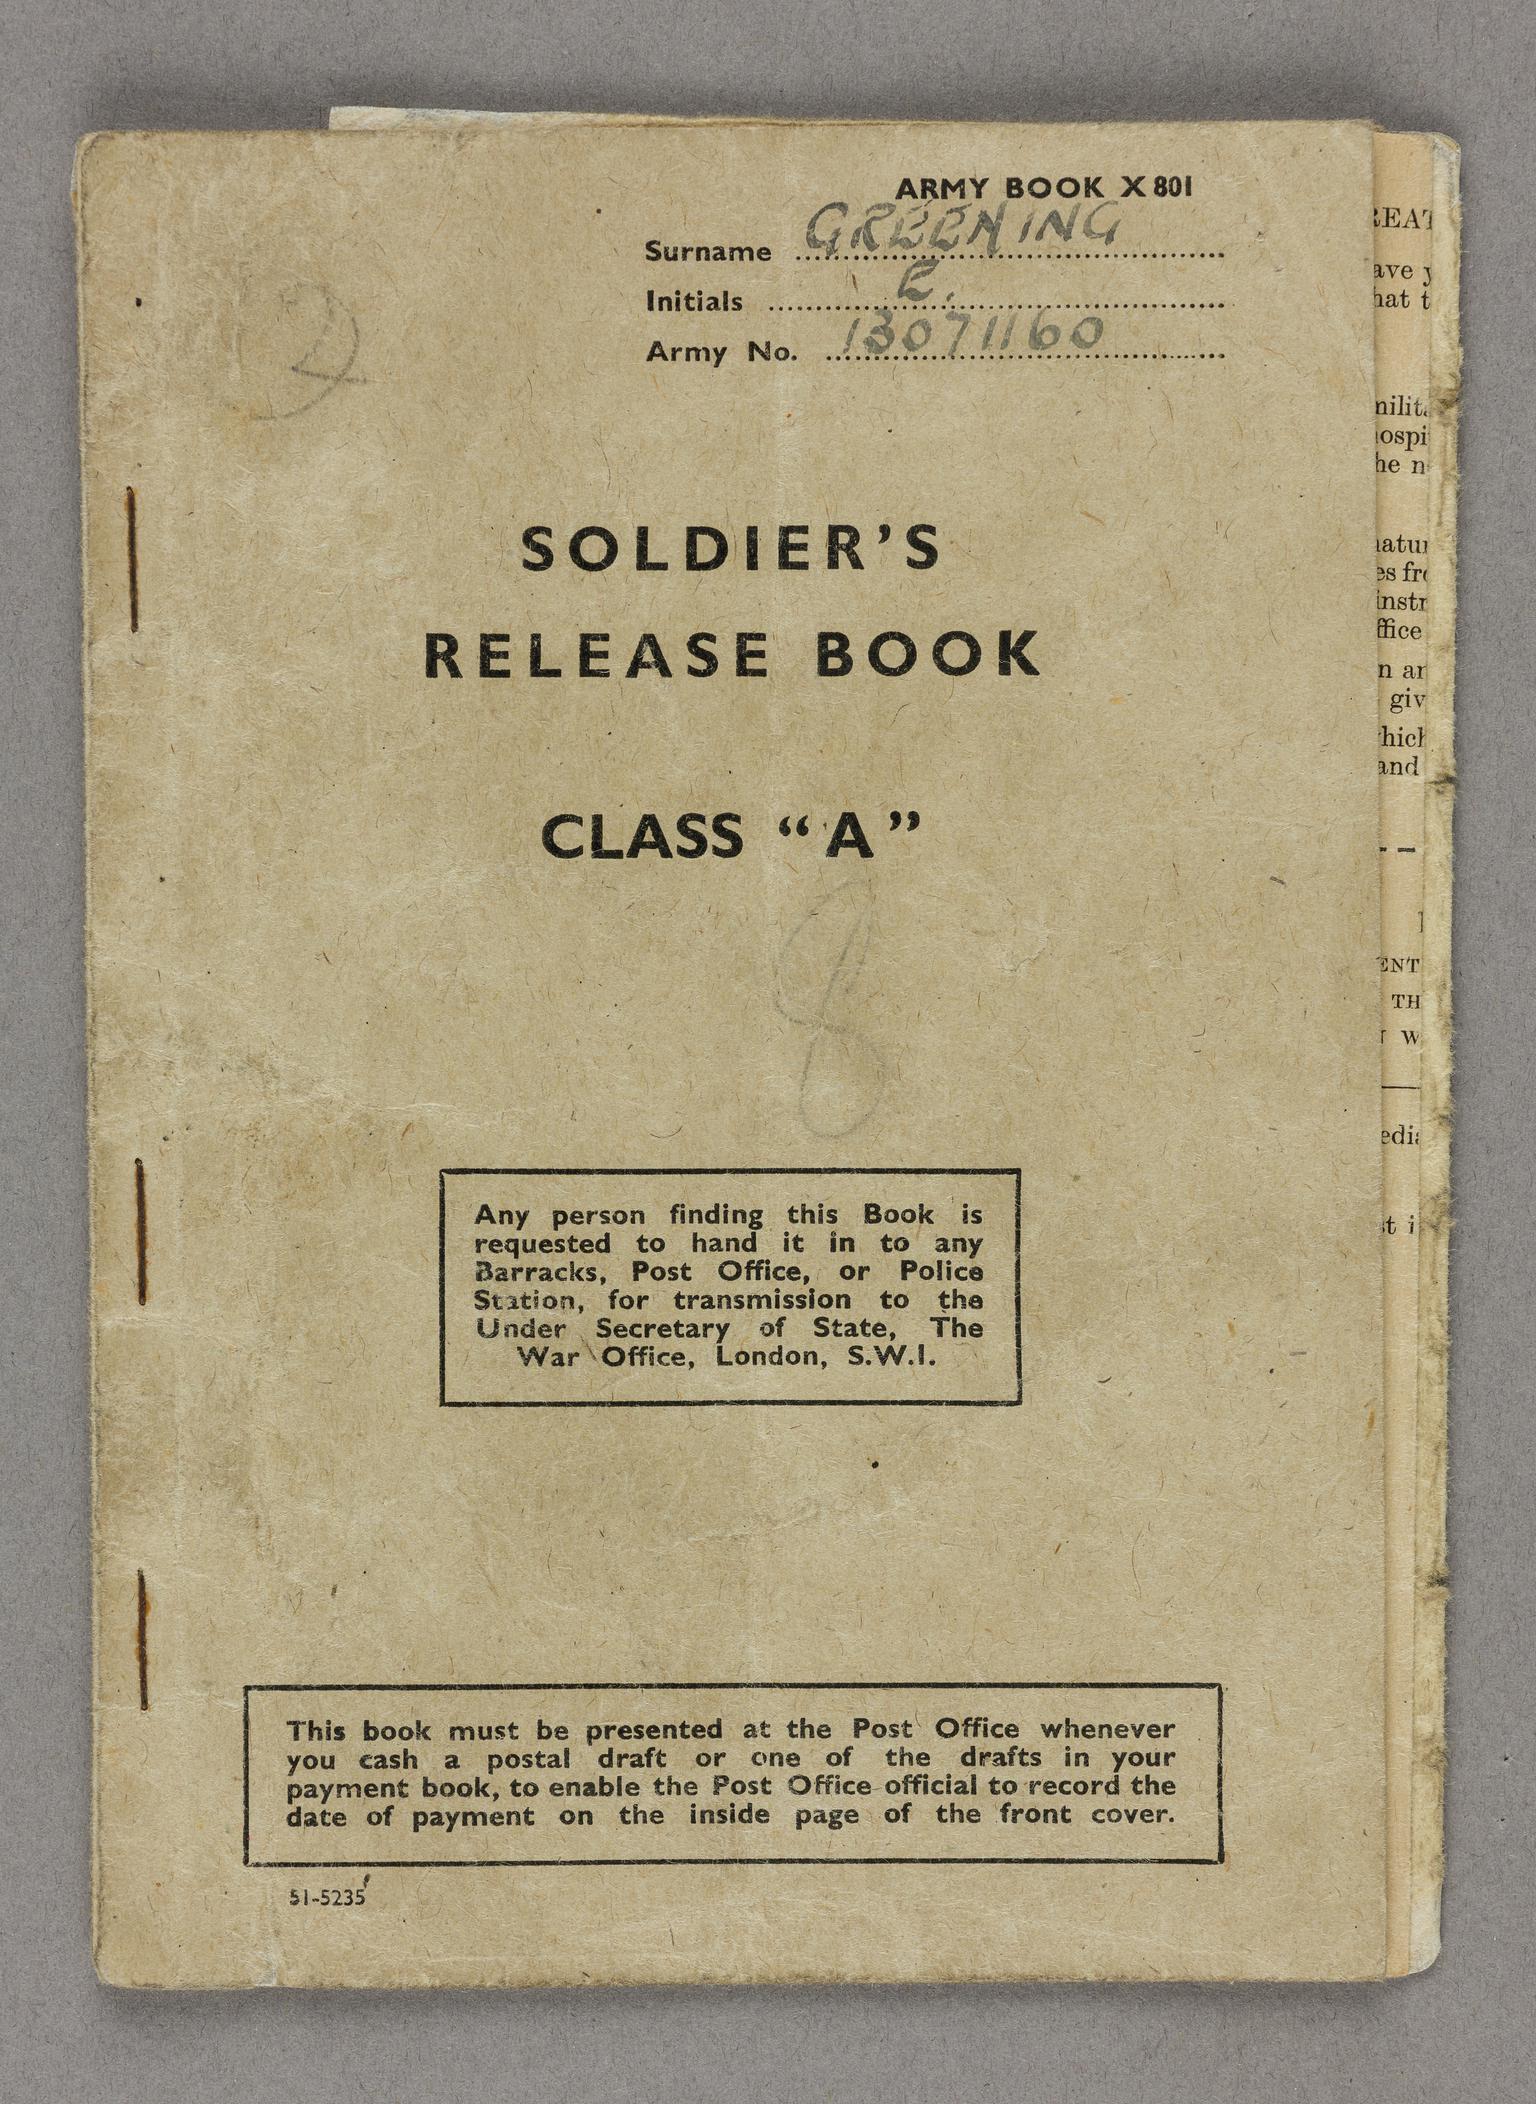 Soldier's release book